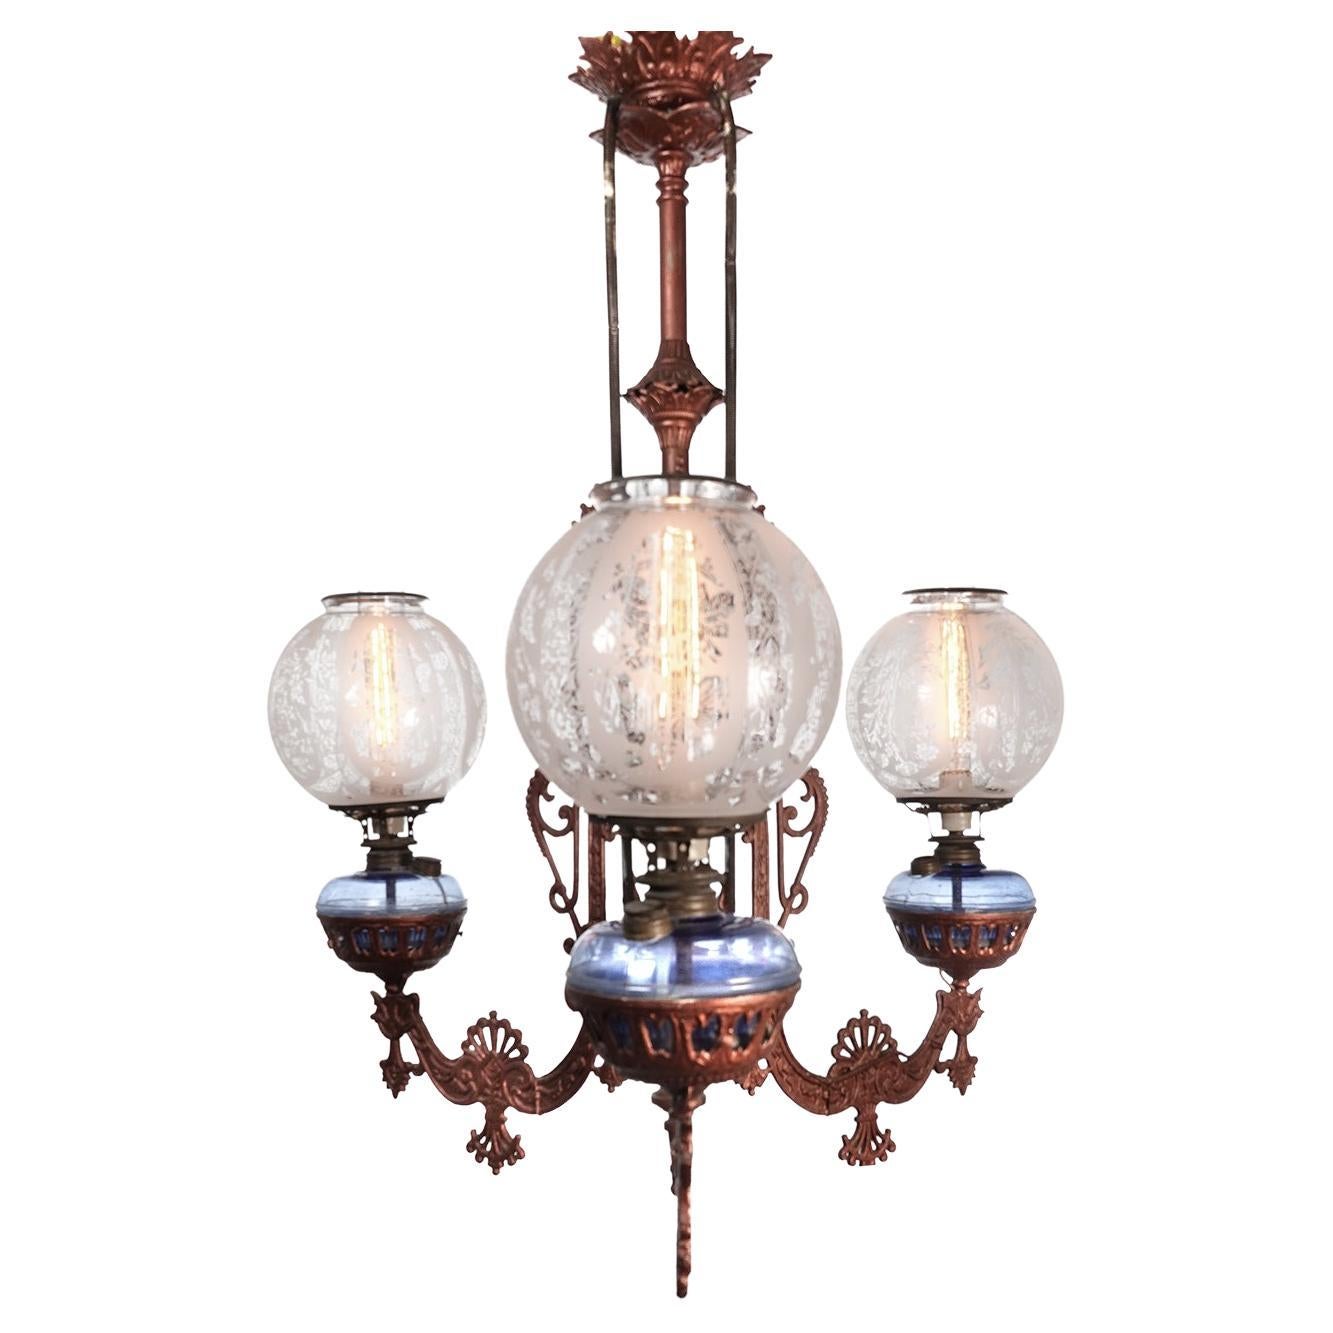 Not many of these large and impressive Eastlake oil chandeliers were made and few survive today. Lamps like this are often unsigned but are attributed to companies like Tucker or Bradley and Hubbard. Our best guess is 1860 by Tucker. There are three